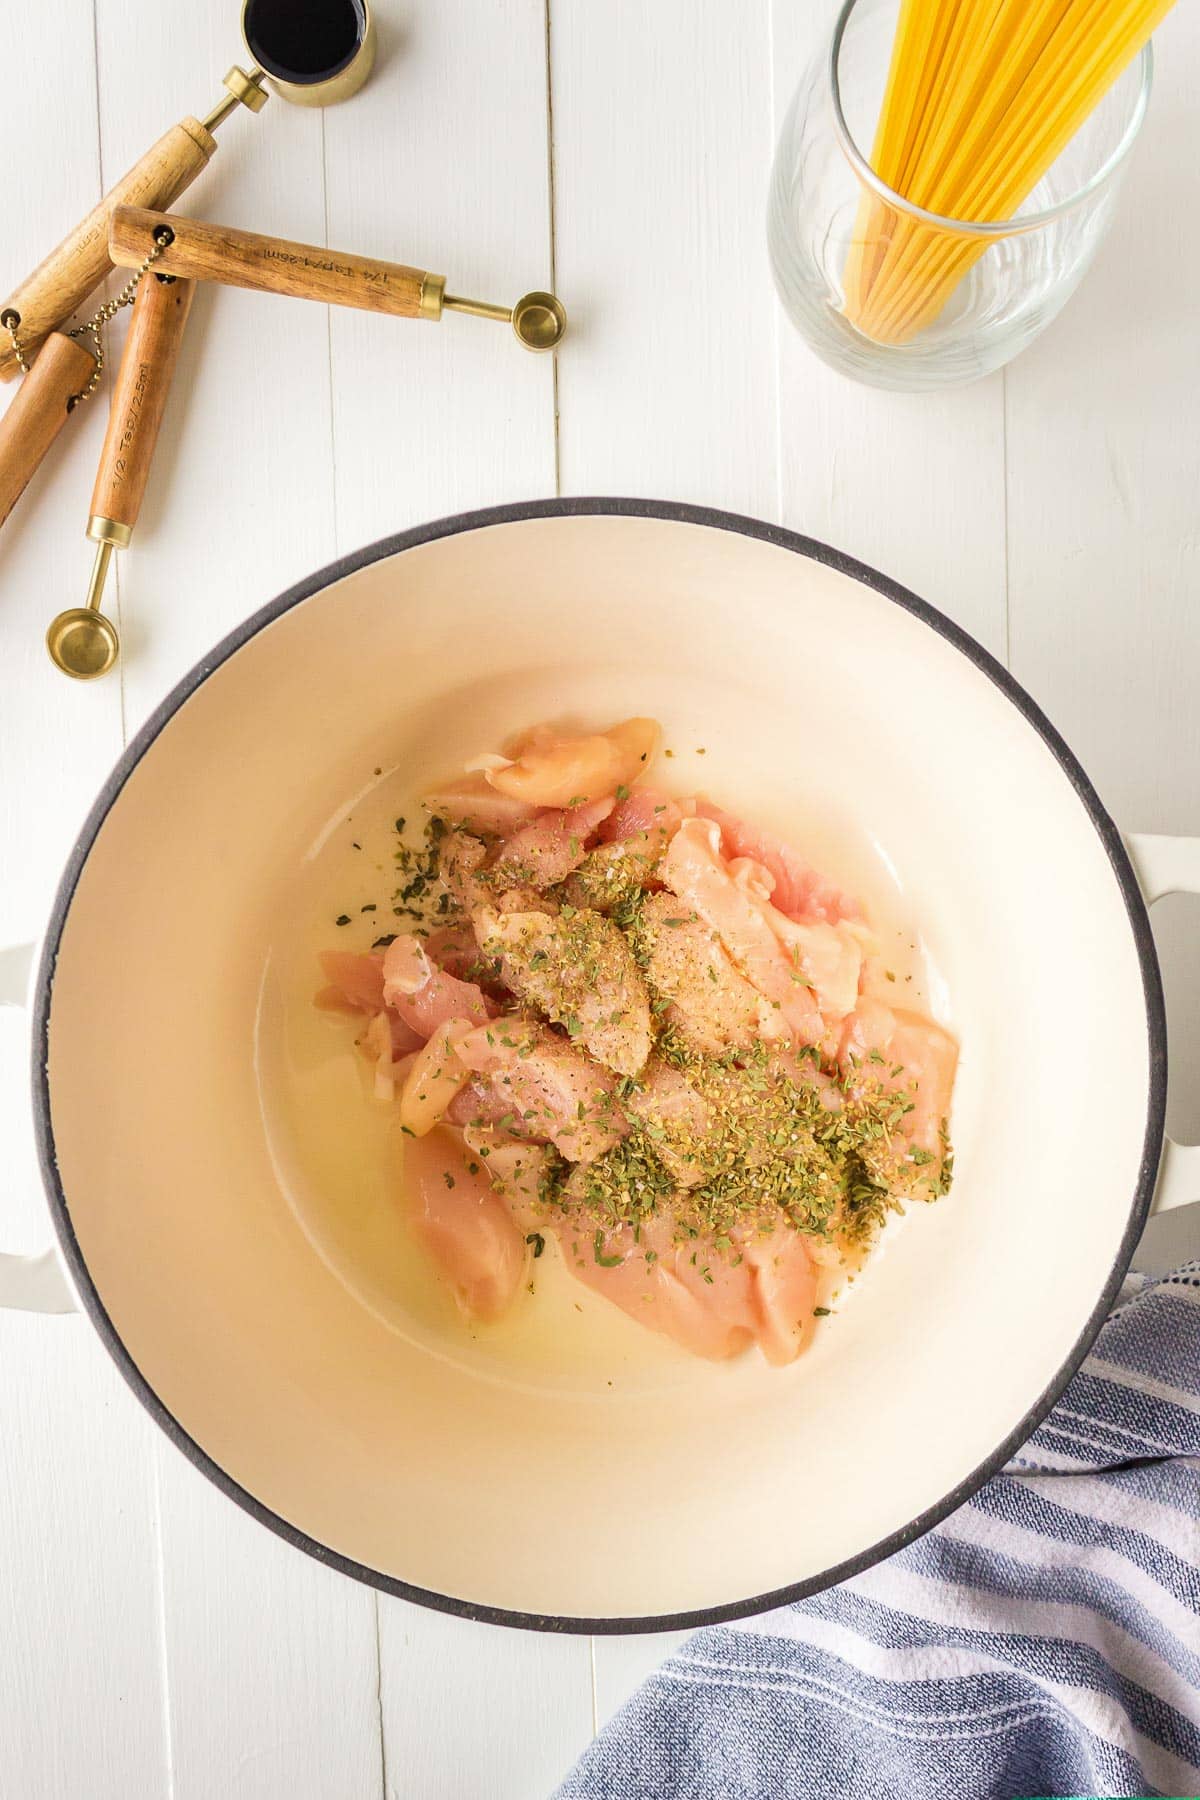 Raw chicken strips seasoned with herbs in a large pot.